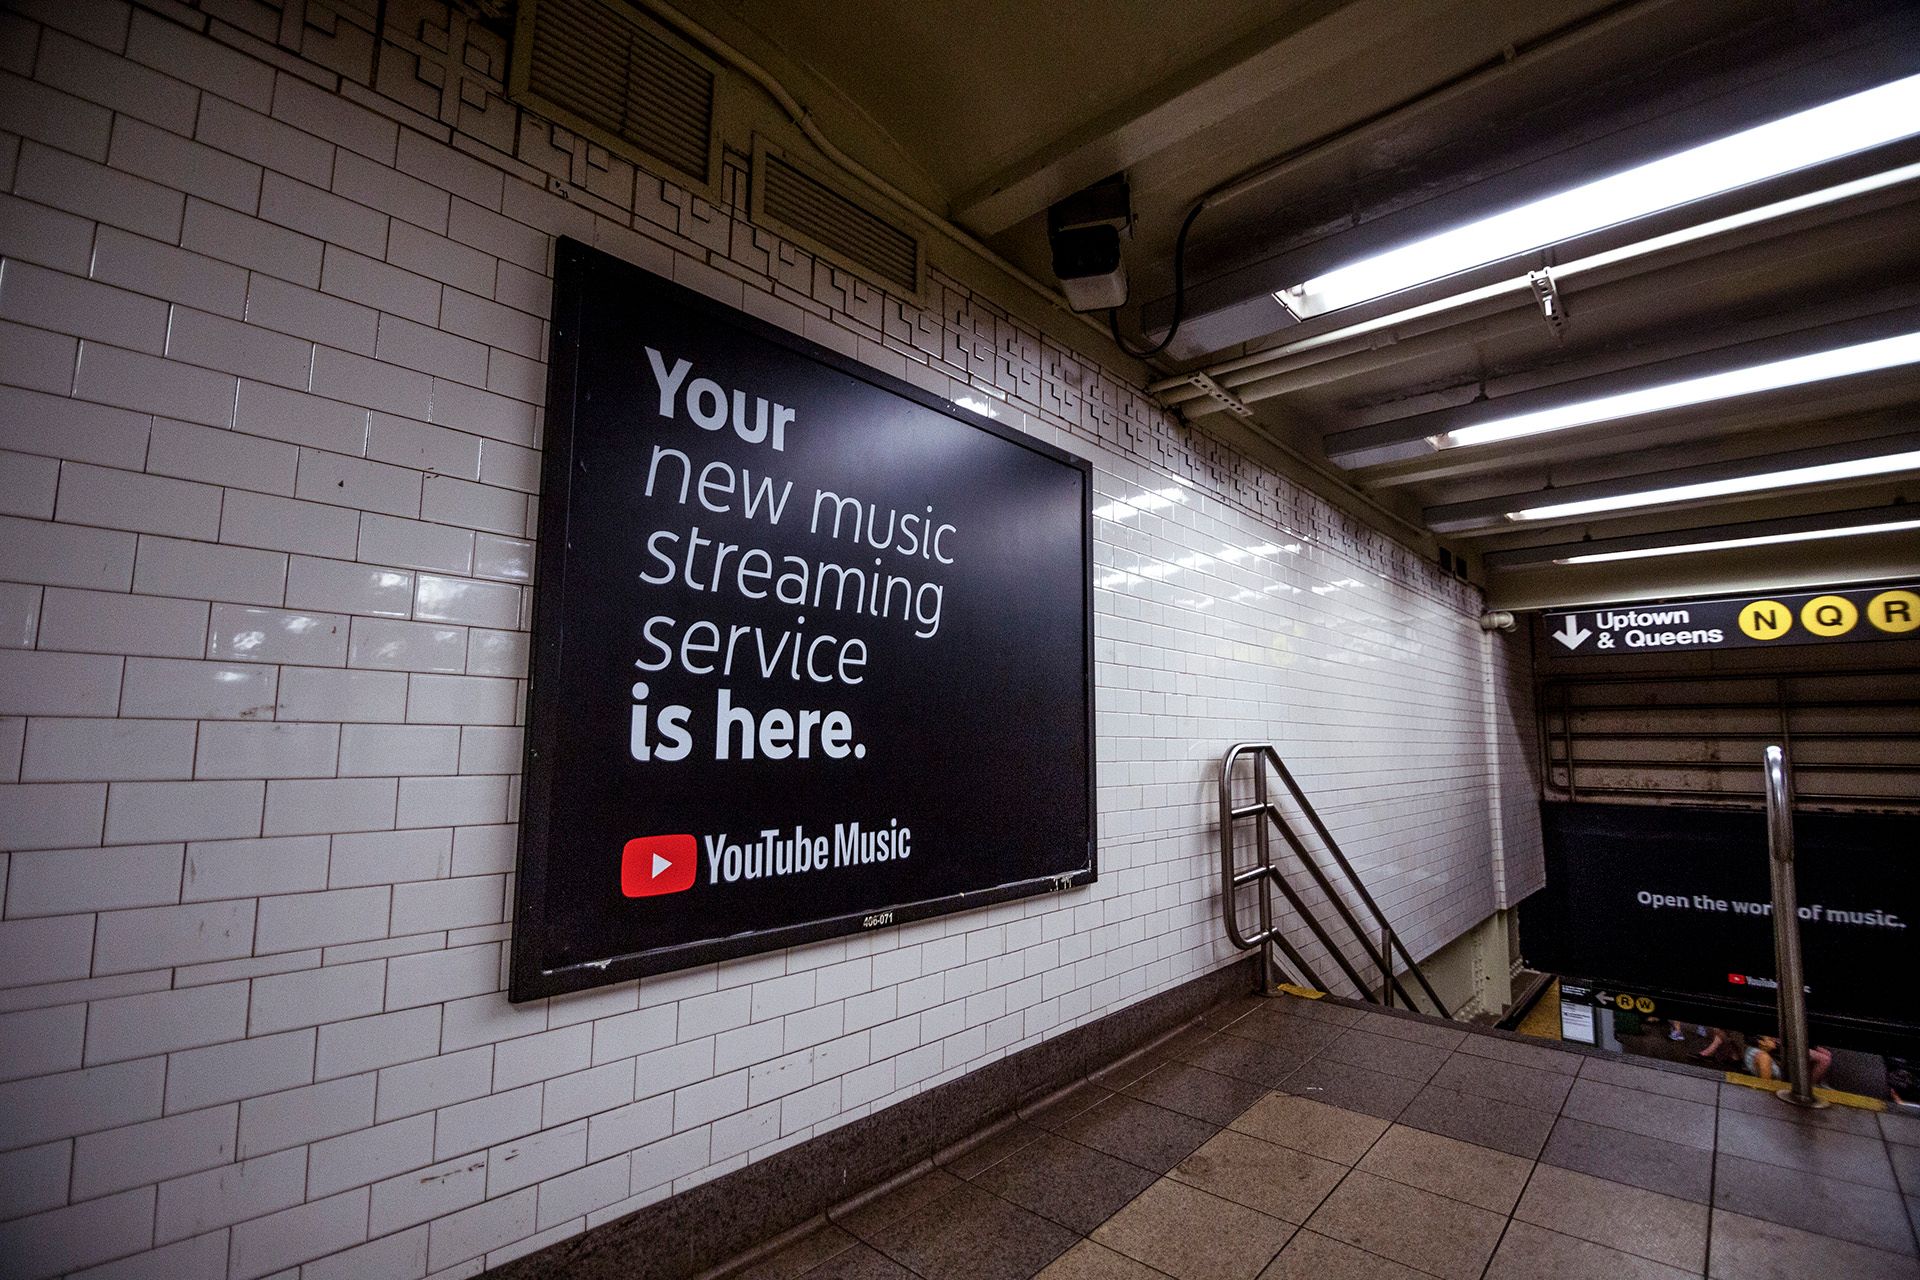 YouTube Music ad on tiled wall in Union Square train station at top of stairs. Your new music streaming service is here.